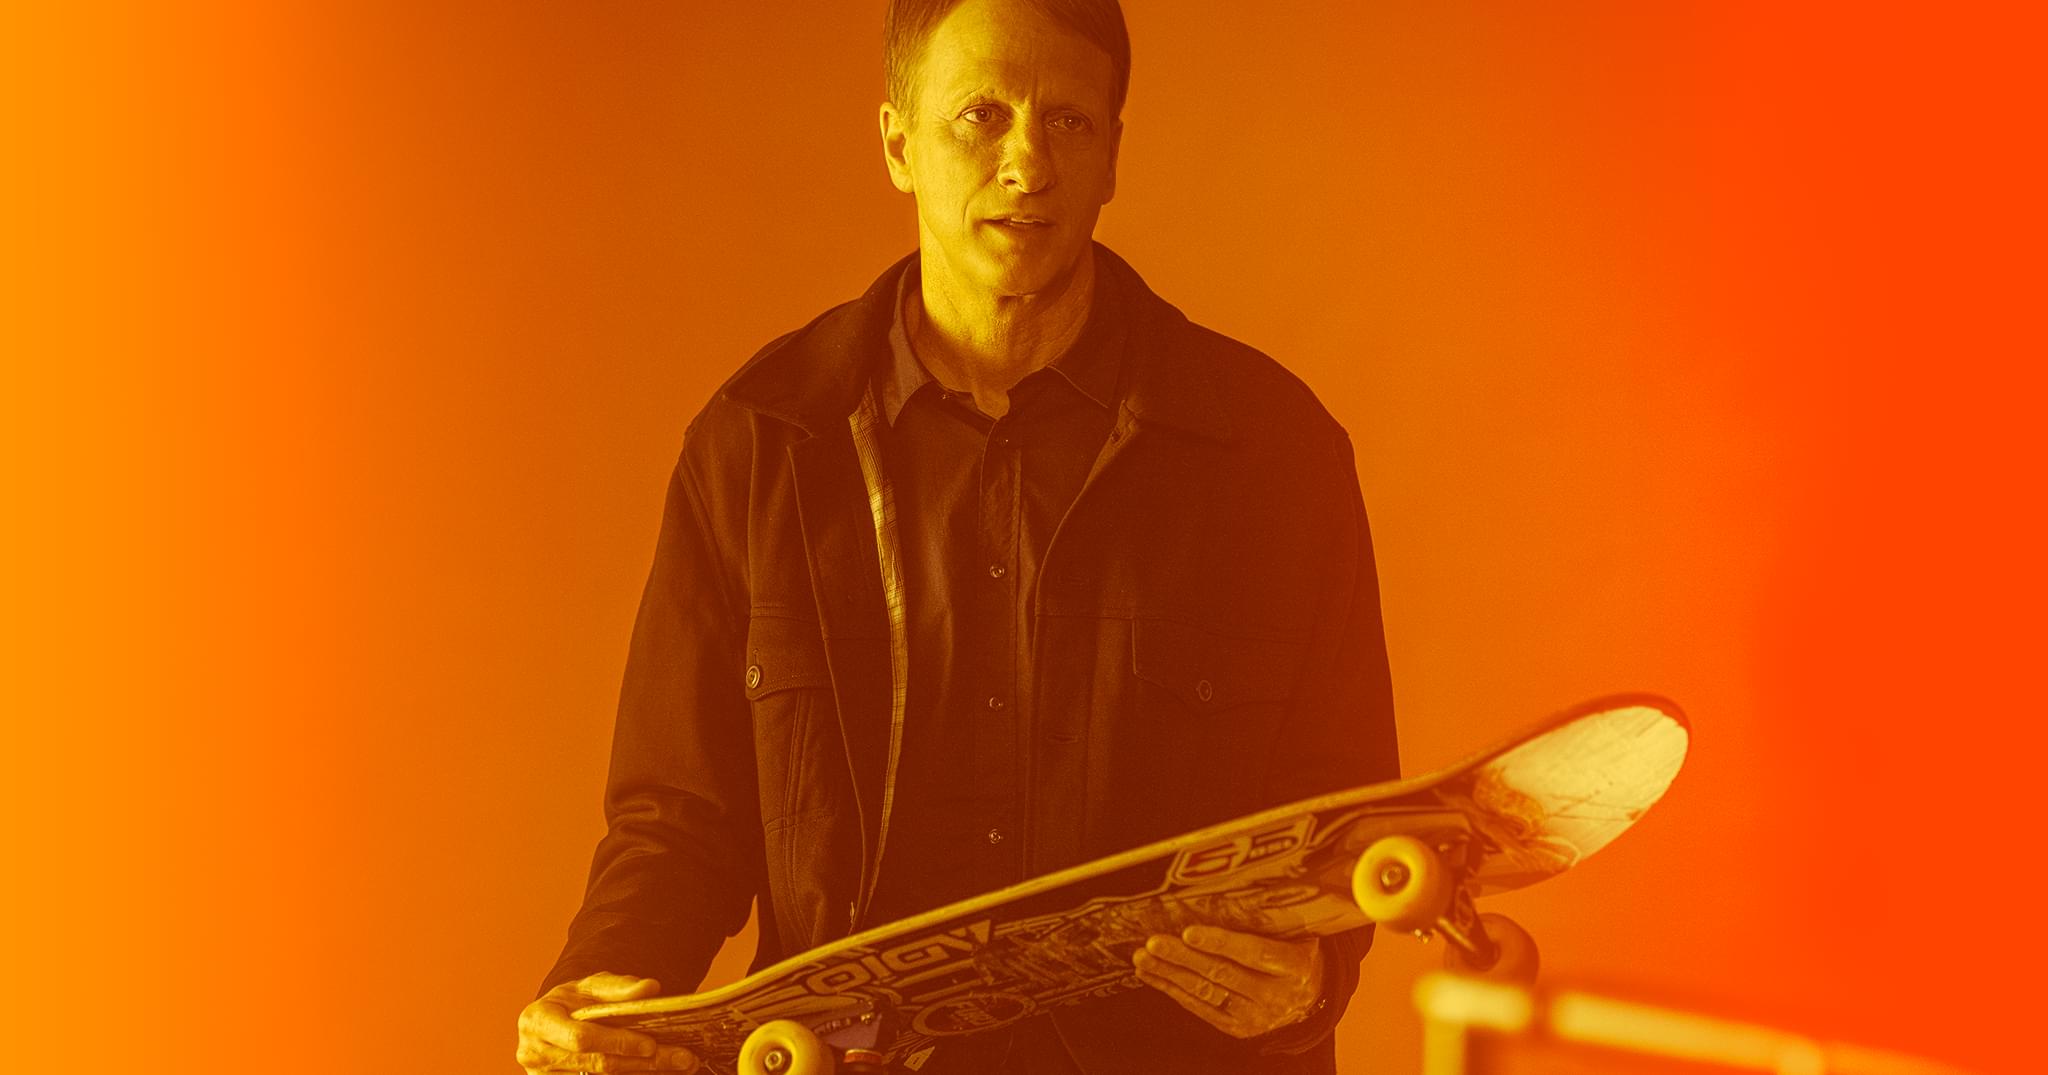 Today’s TVs and Tony Hawk Make the Artistry Look Effortless